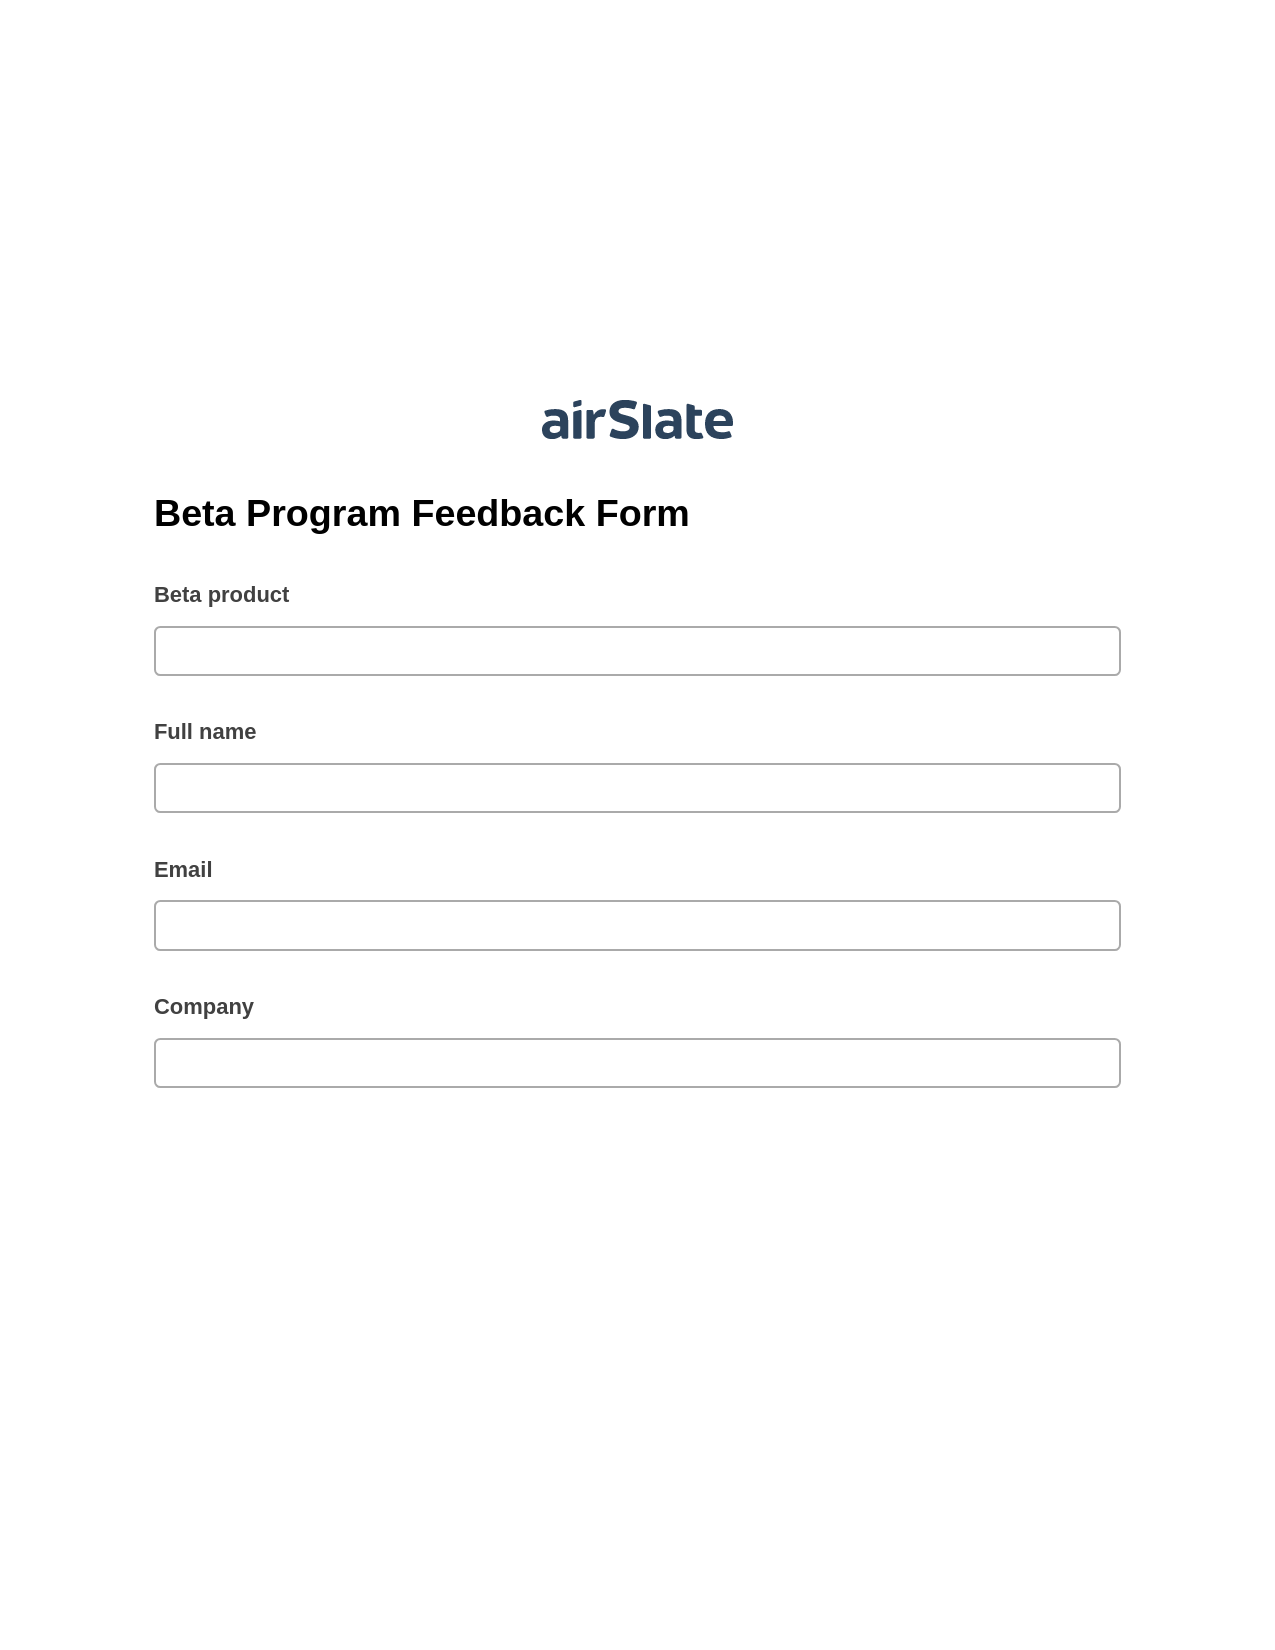 Multirole Beta Program Feedback Form Pre-fill from CSV File Bot, Add Tags to Slate Bot, Export to Google Sheet Bot